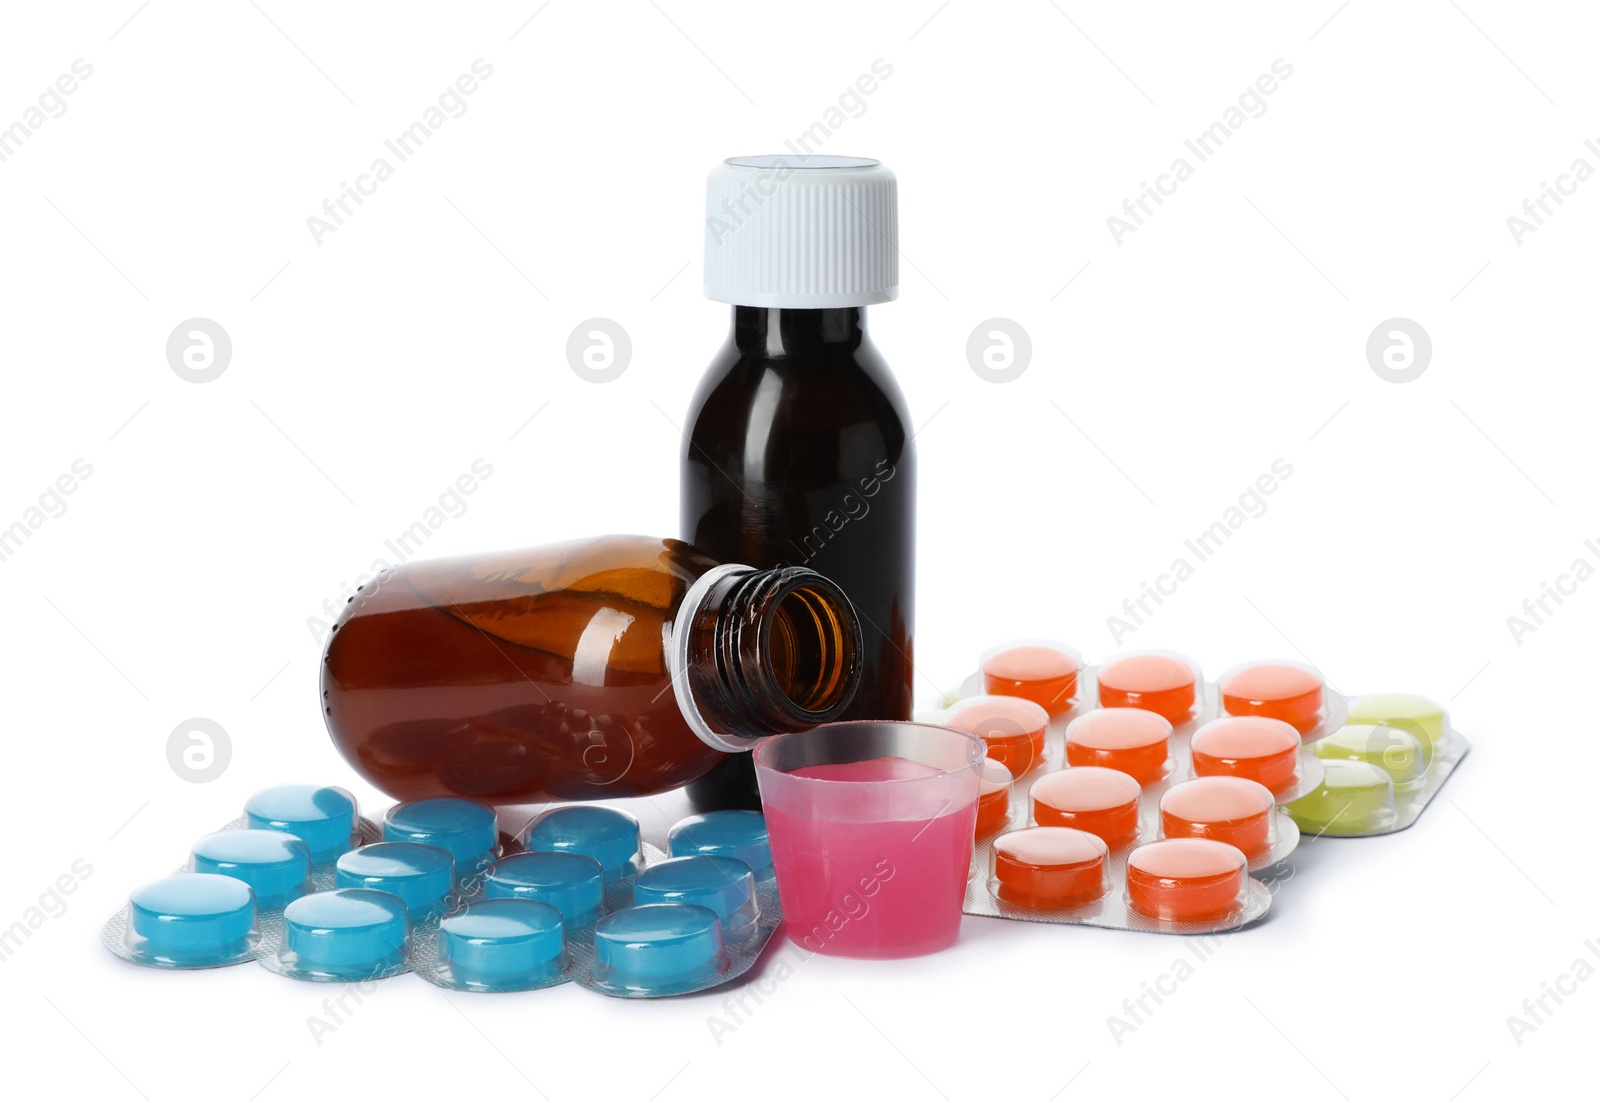 Photo of Cough syrup and different pills on white background